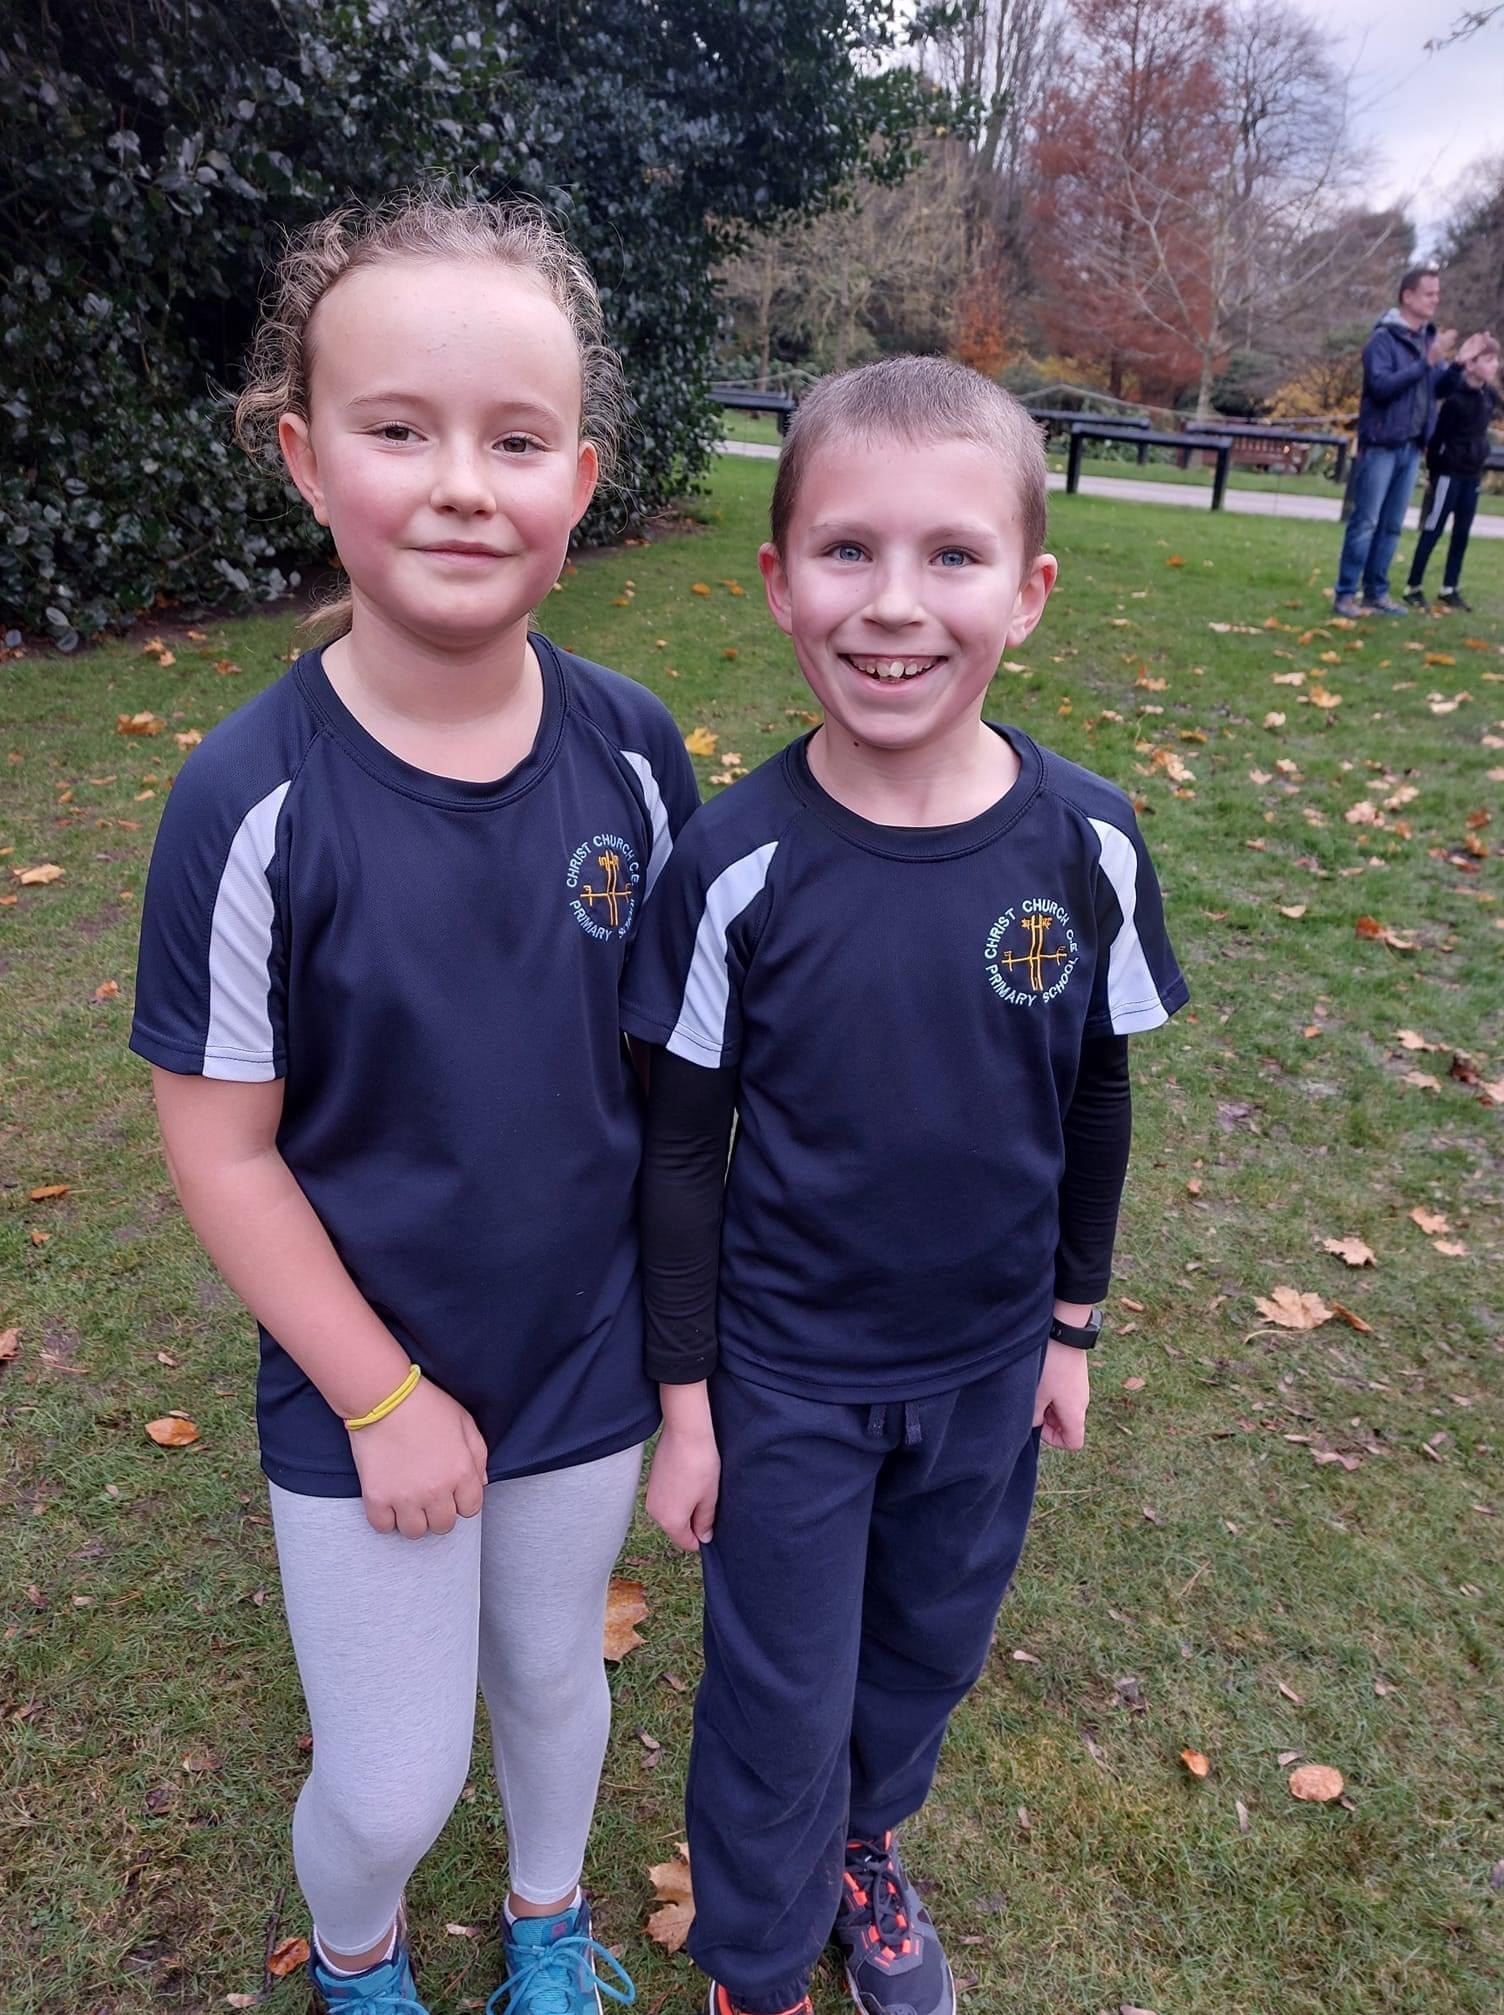 Pictures from the second round of the Neville Jones Warrington Schools Cross Country League at Walton Gardens